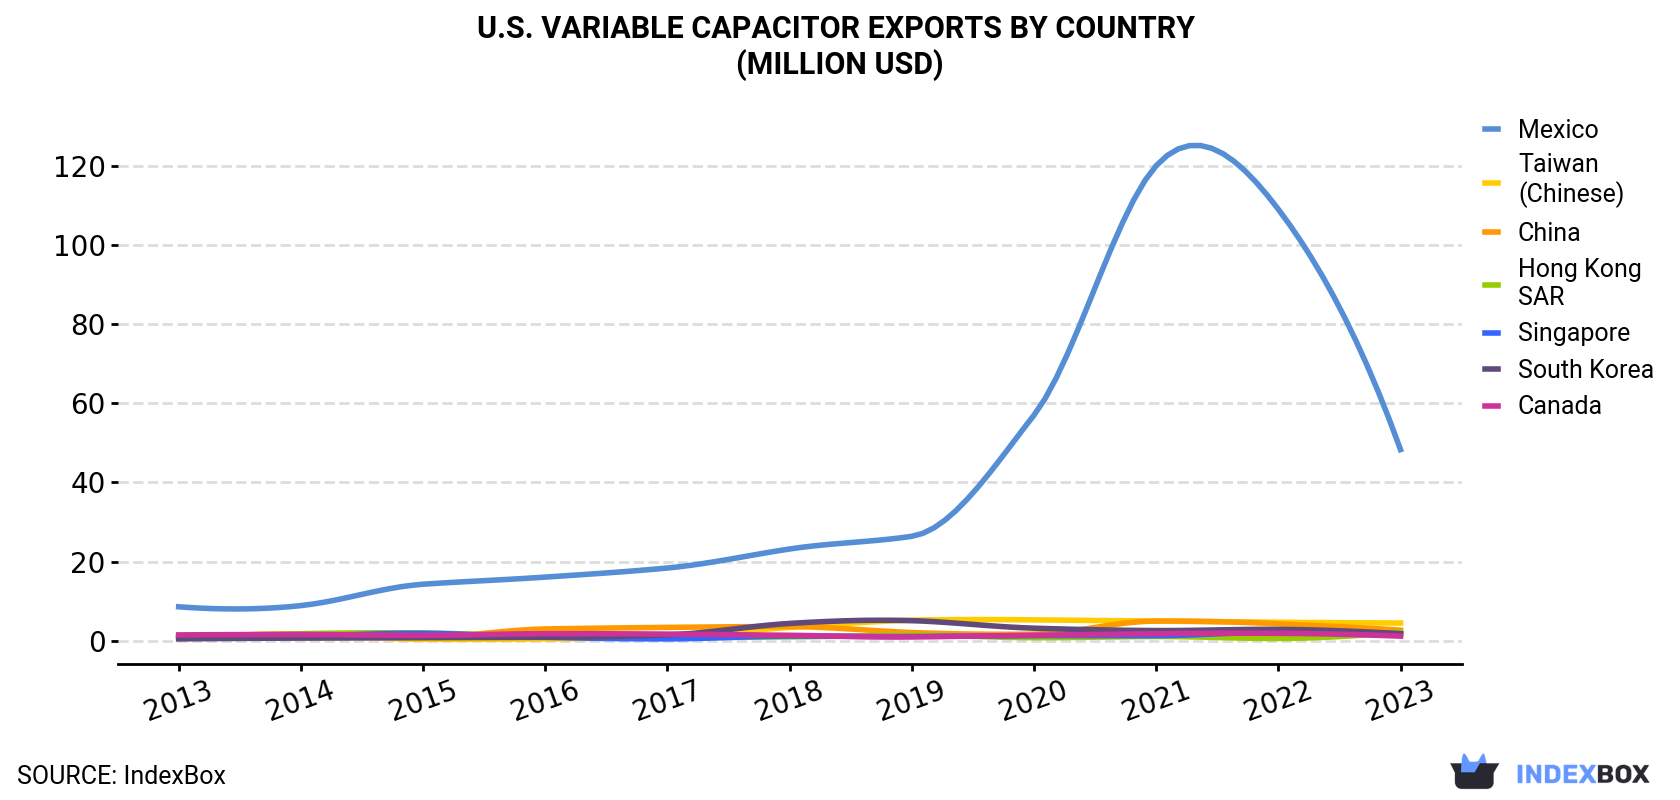 U.S. Variable Capacitor Exports By Country (Million USD)